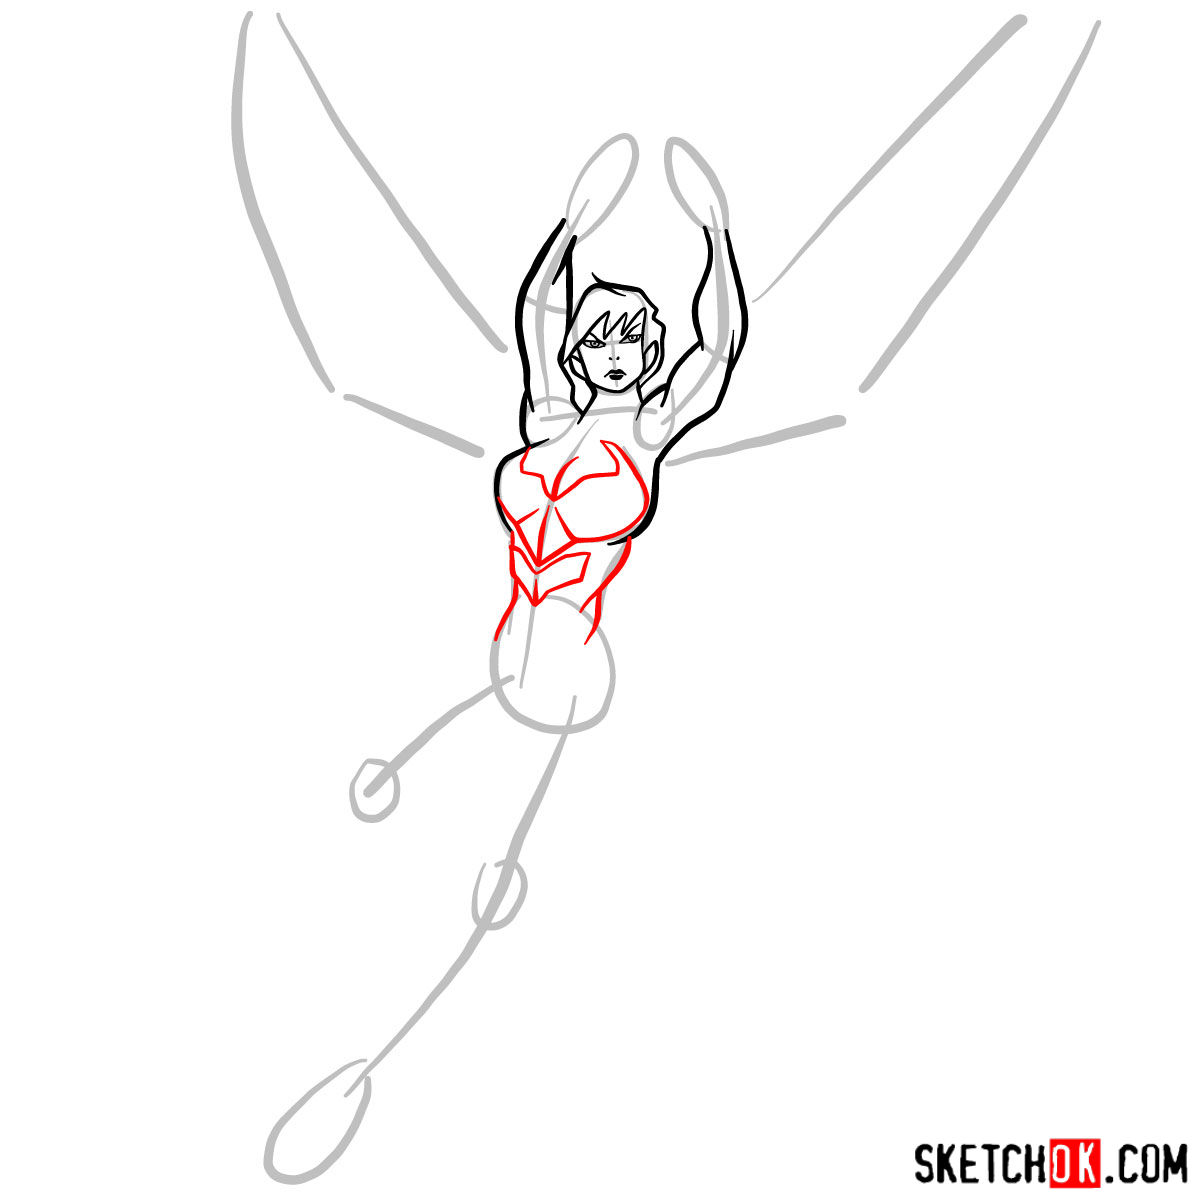 How to draw Wasp, Janet van Dyne from Marvel Comics - step 06